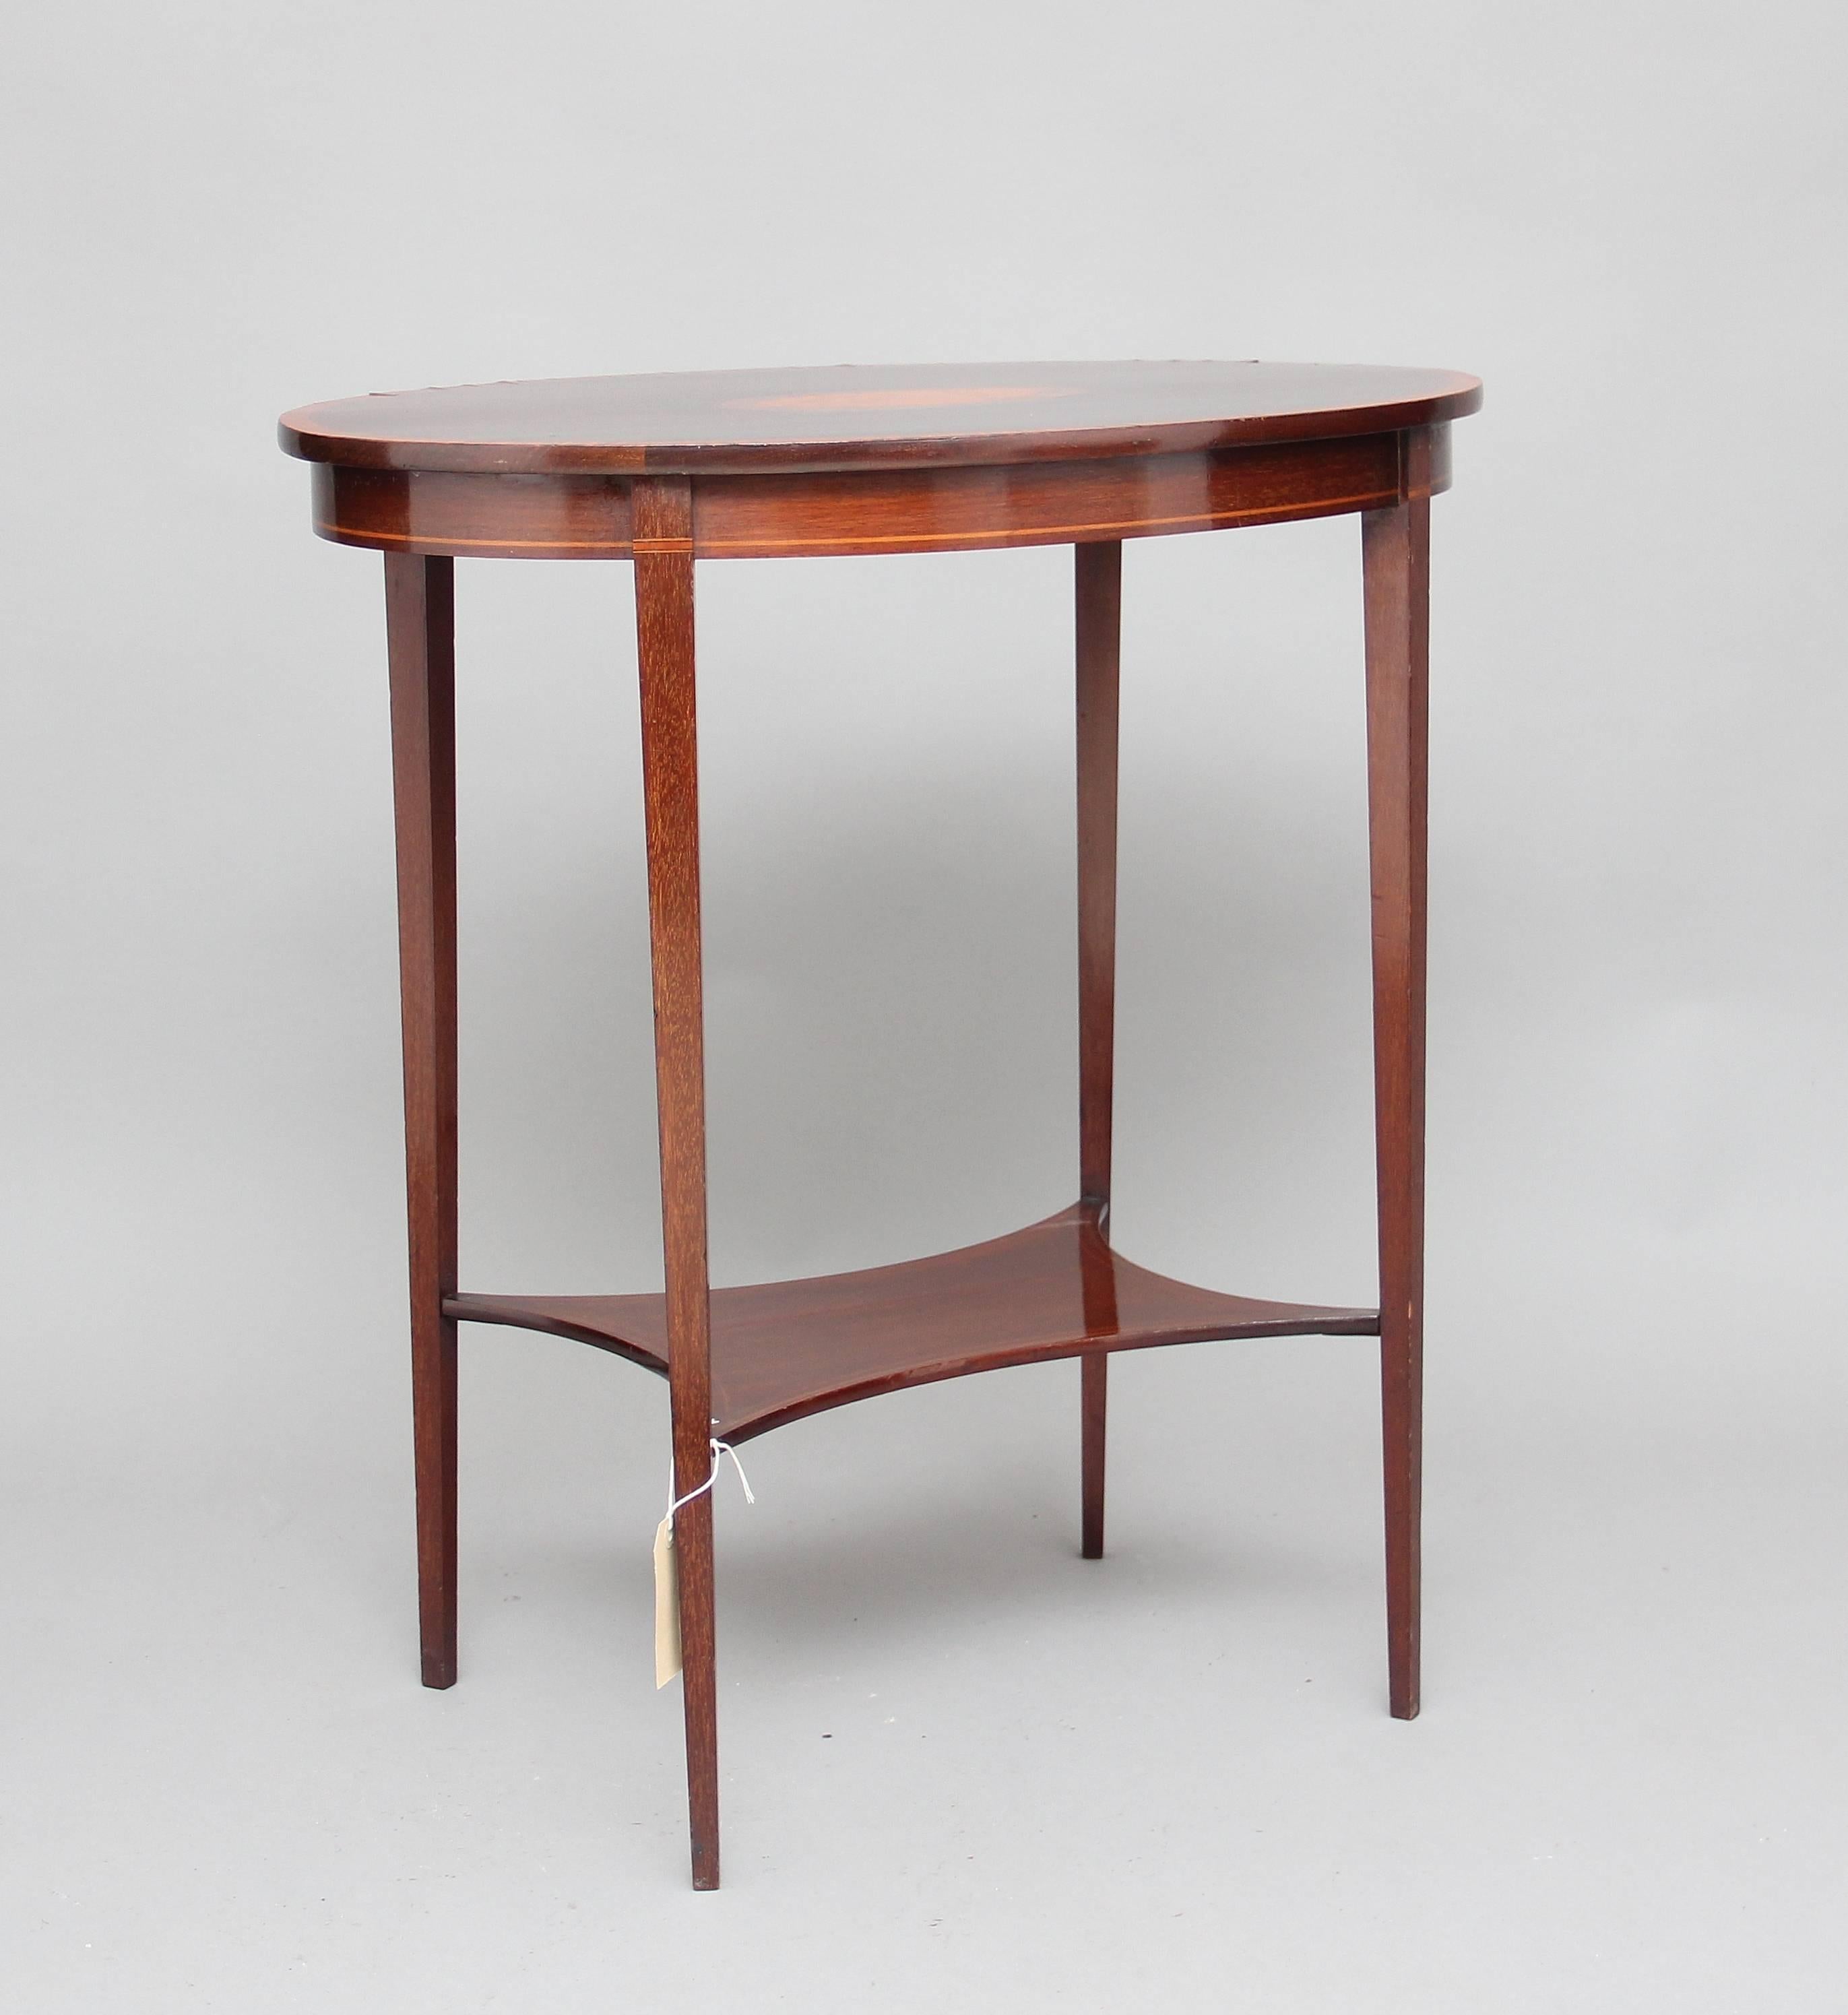 Early 20th century inlaid mahogany occasional table, the oval top having a decorative shell inlay, supported on square tapering legs united by a shaped shelf, circa 1910.